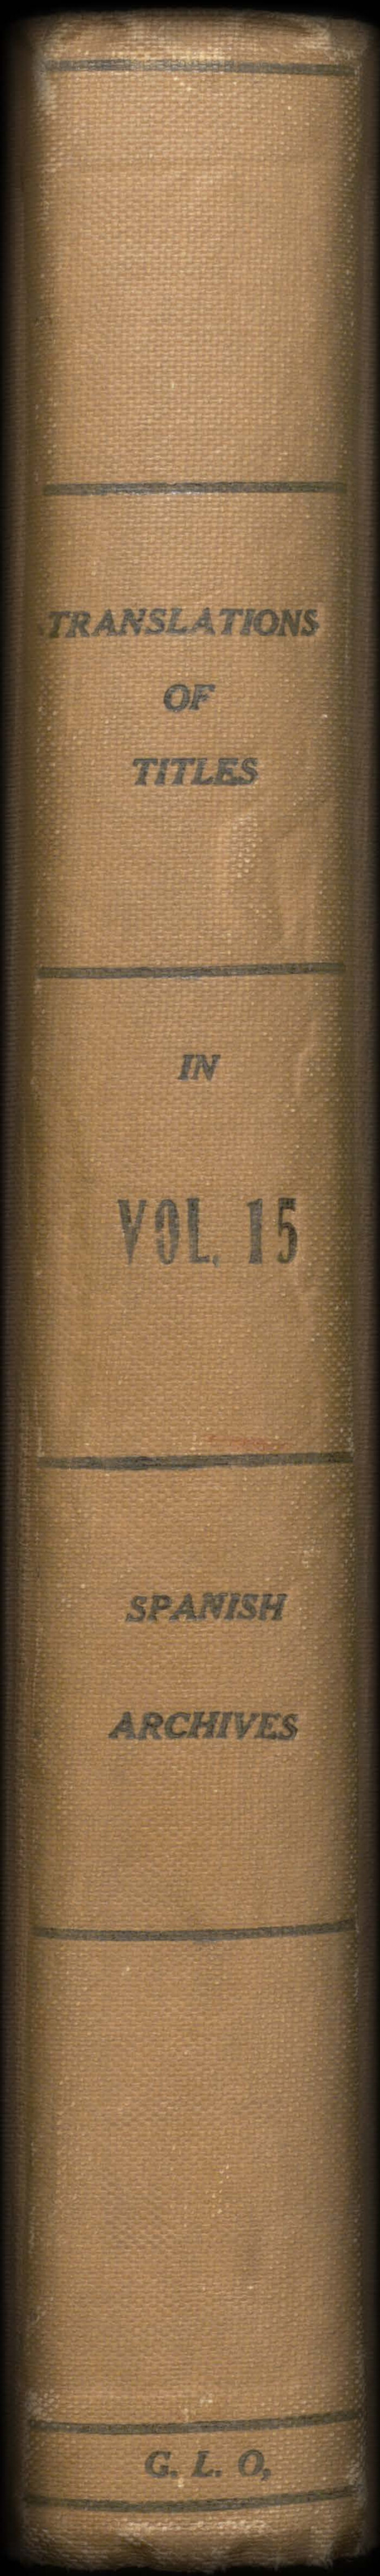 94550, Translations of Titles in Vol. 15, Spanish Archives, Historical Volumes